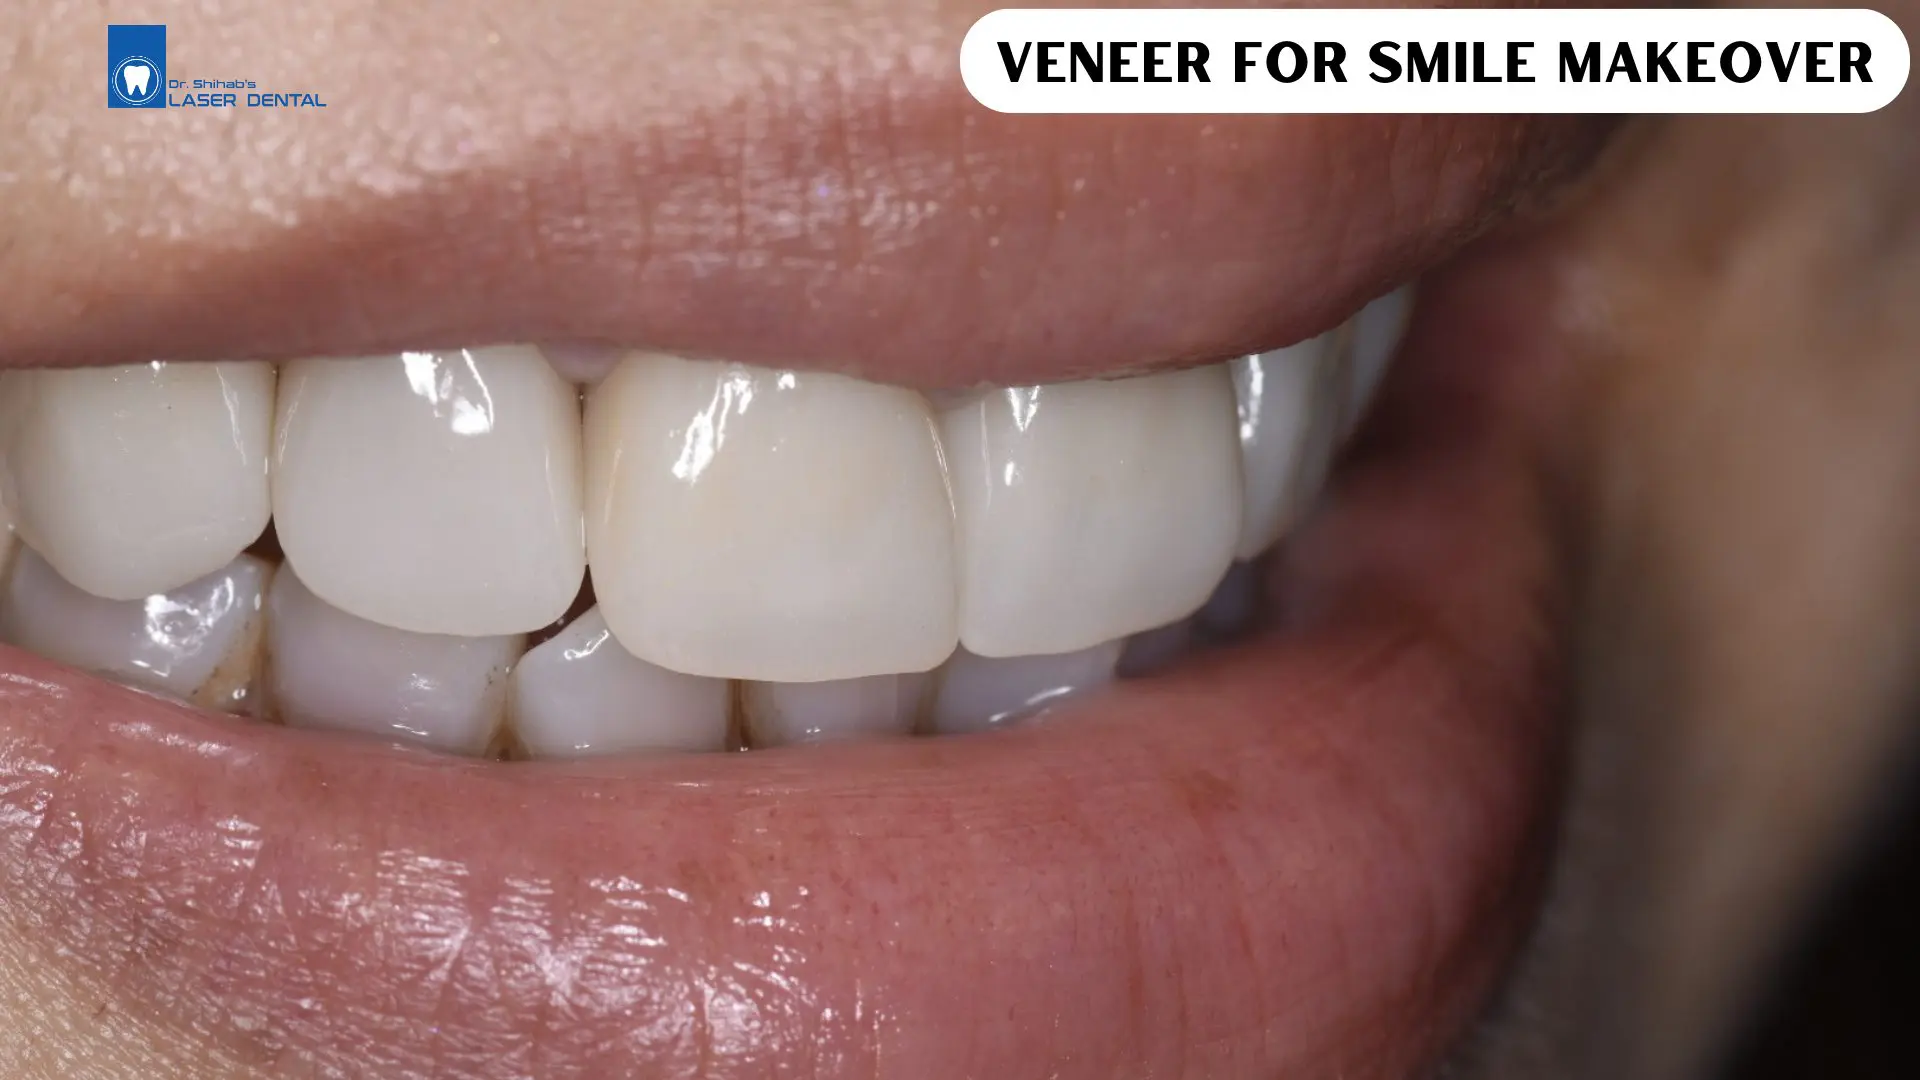 Veneers for smile makeover